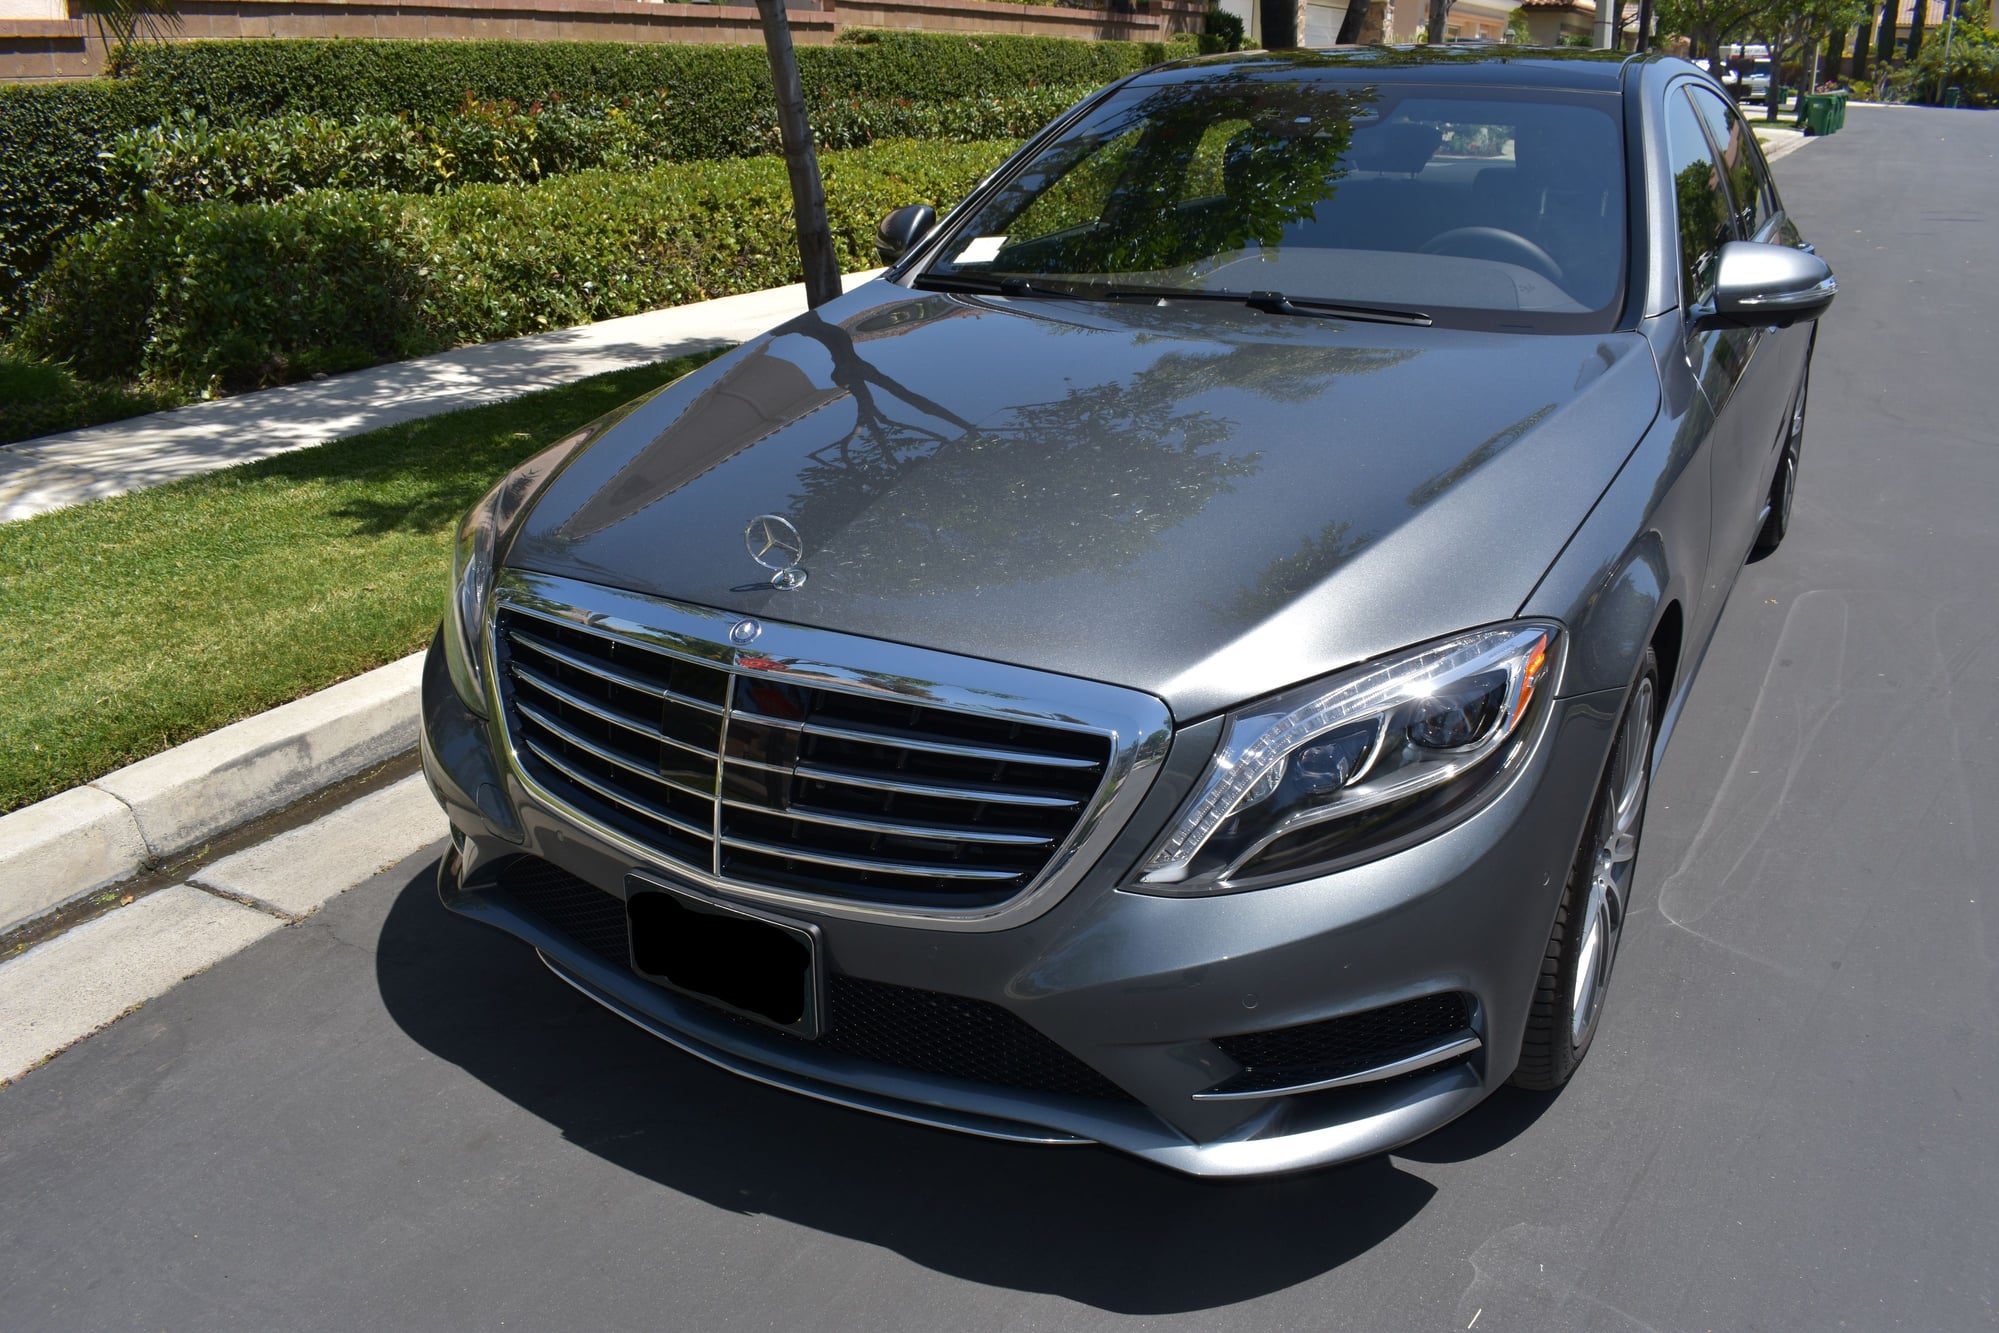 2017 Mercedes-Benz S550 - LIKE NEW 2017 MERCEDES-BENZ S550 (MOTIVATED SELLER) - Used - VIN WDDUG8CB0HA317443 - 800 Miles - 8 cyl - 4WD - Automatic - Sedan - Gray - Irvine, CA 92620, United States